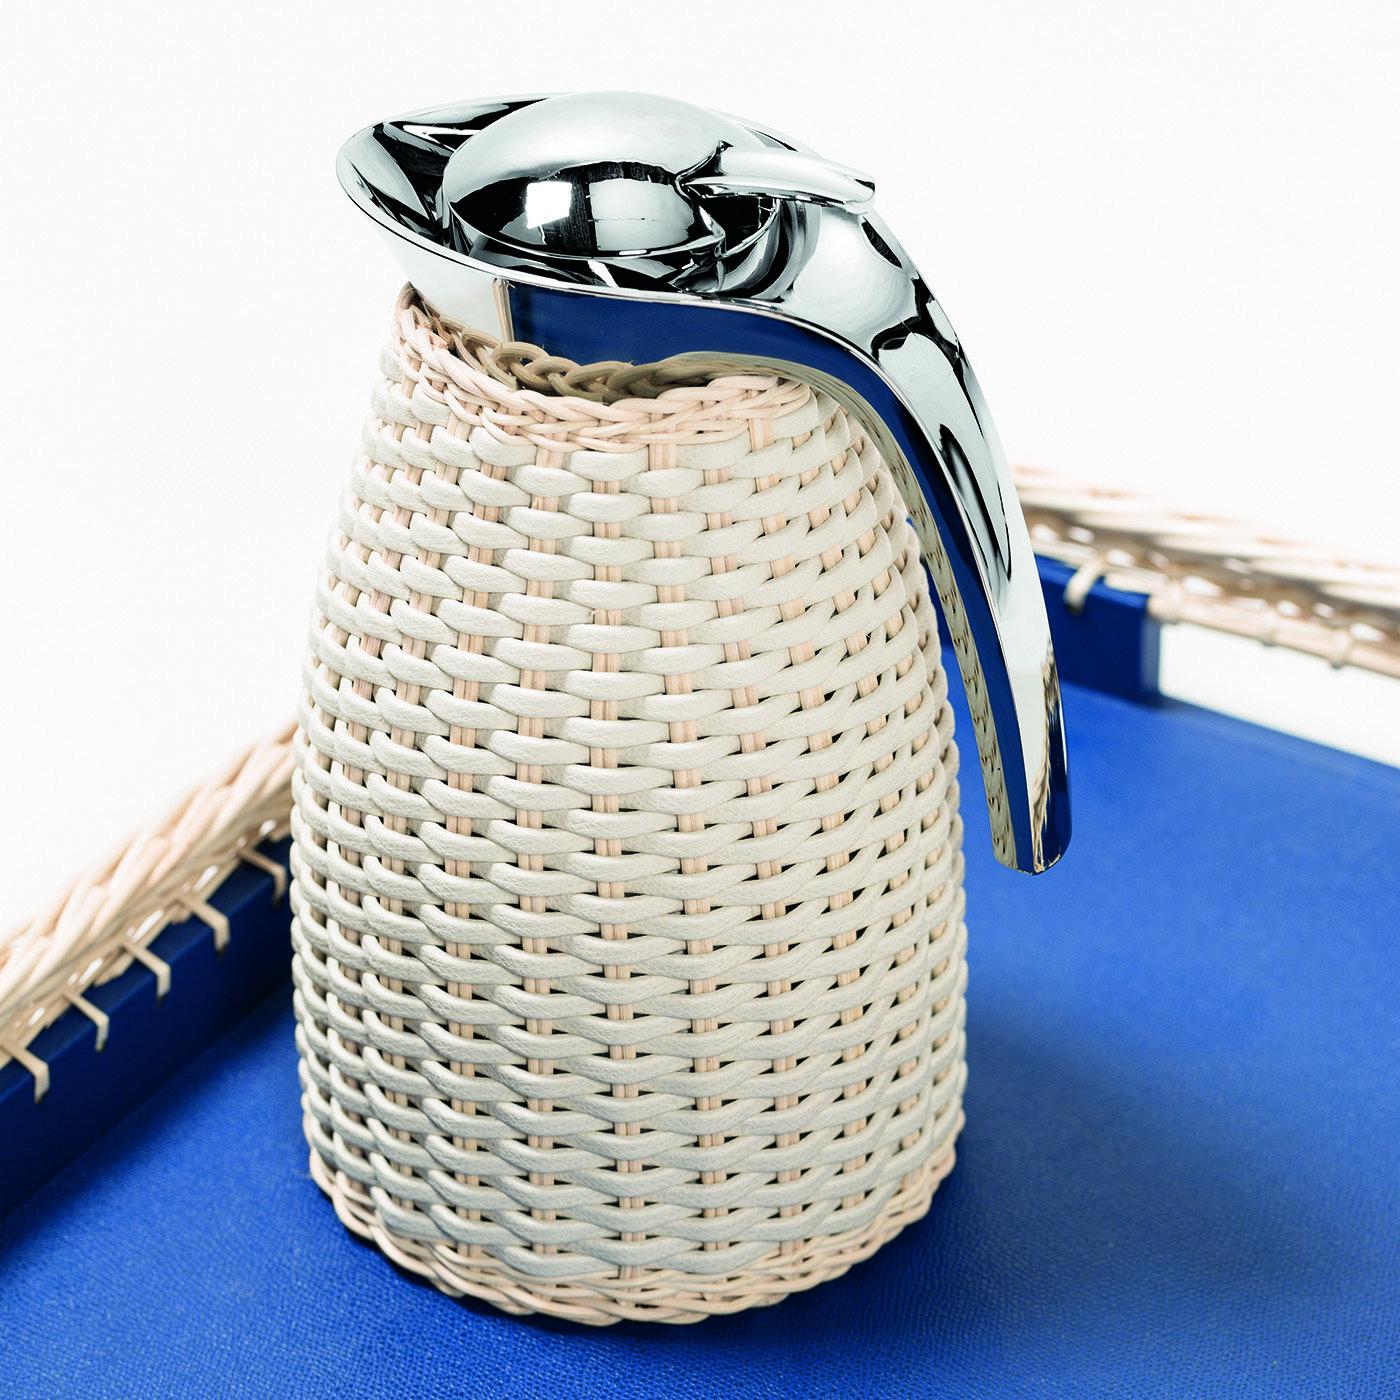 A well-received housewarming gift, this splendid thermal carafe boasts a timeless and versatile charm that will effortlessly complete any kitchenware collection. Almost entirely covered with a hand-woven white Napa leather and natural rattan